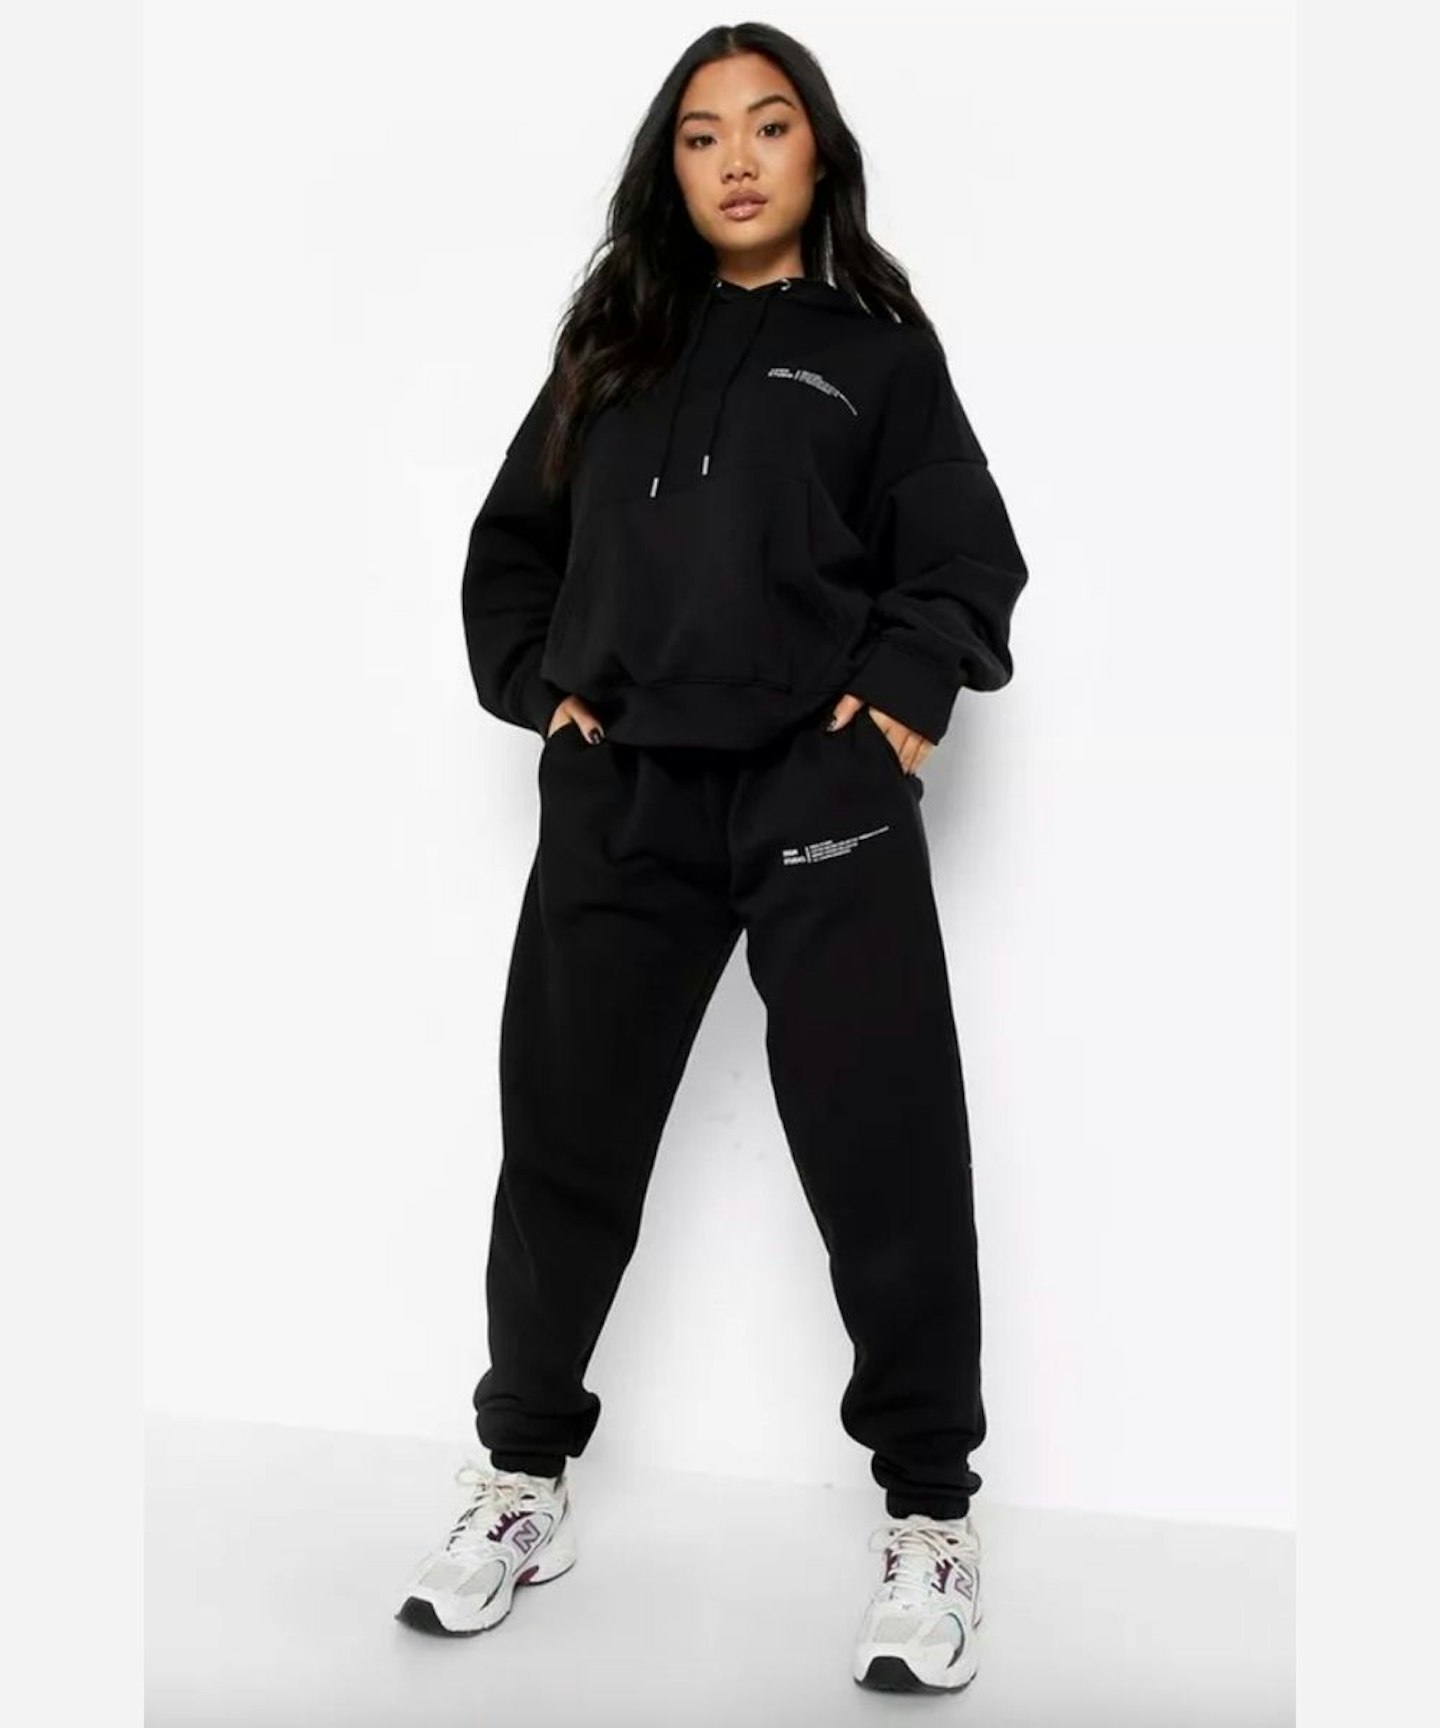 Boohoo Airport Tracksuits: Where To Shop The Viral Loungewear Sets